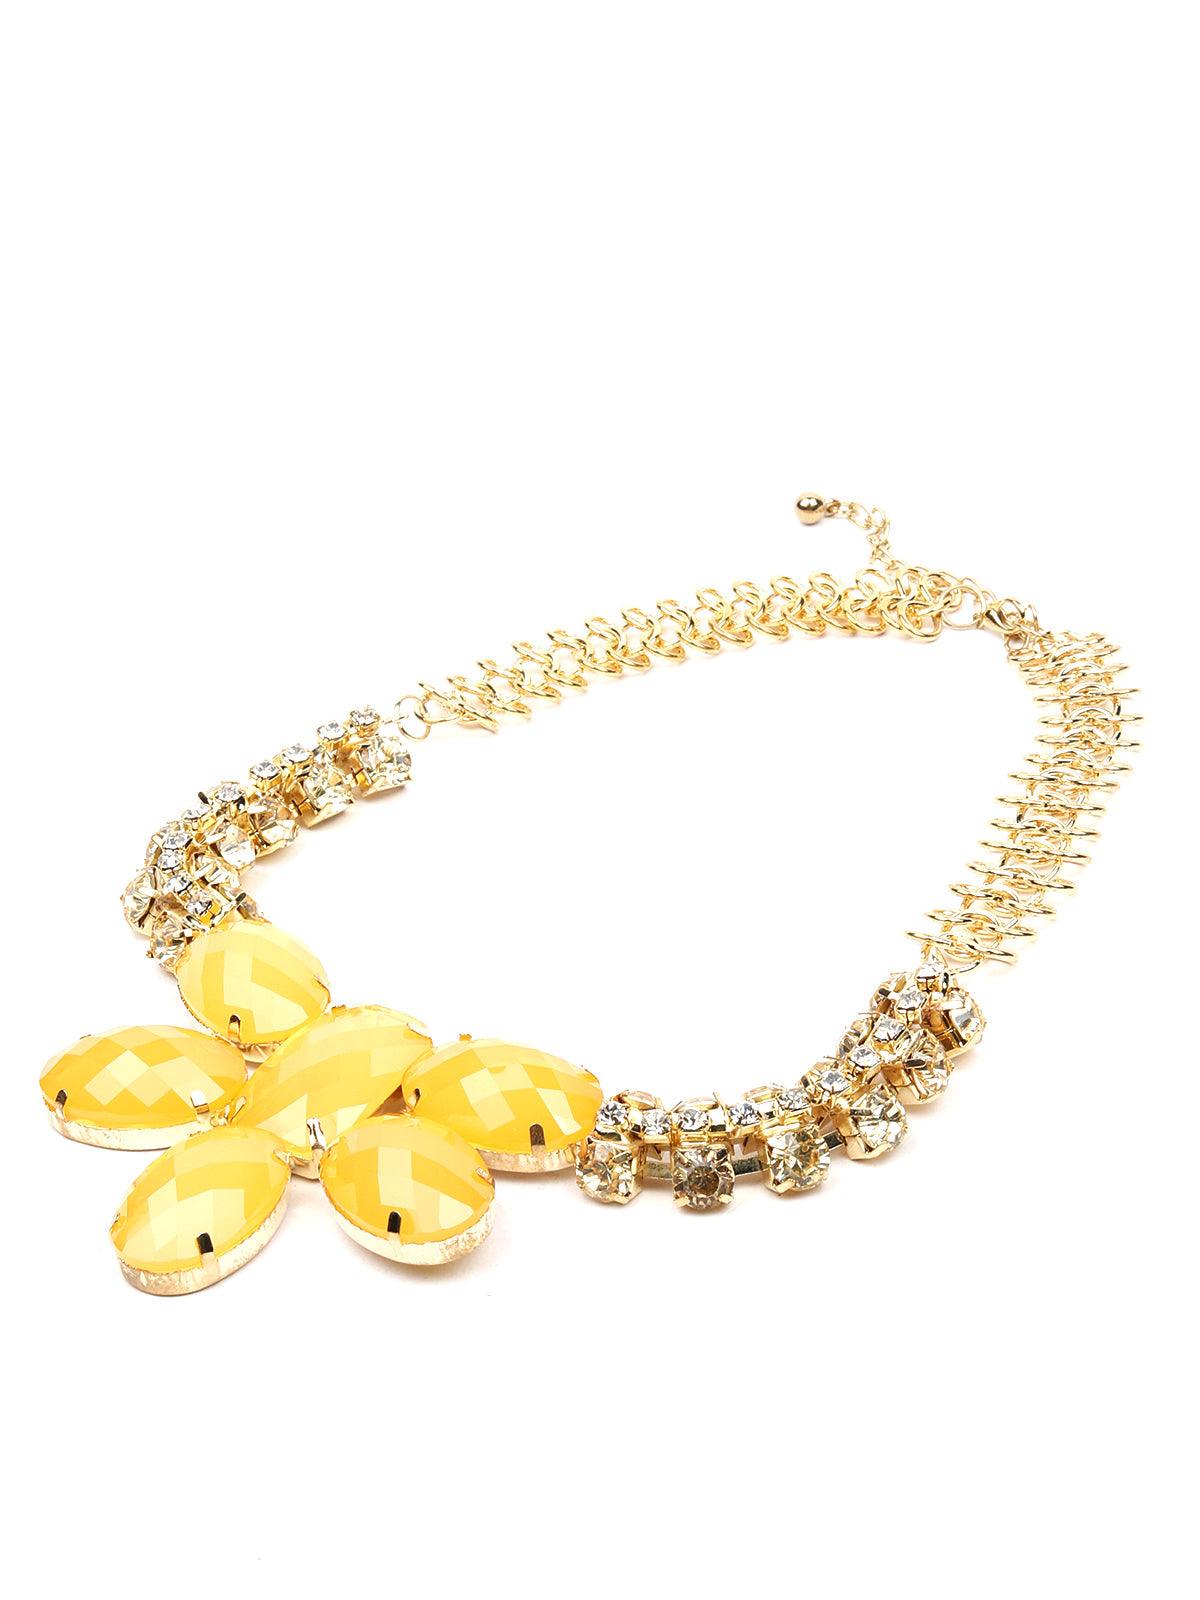 Women's Vibrant Yellow Stunning Necklace - Odette